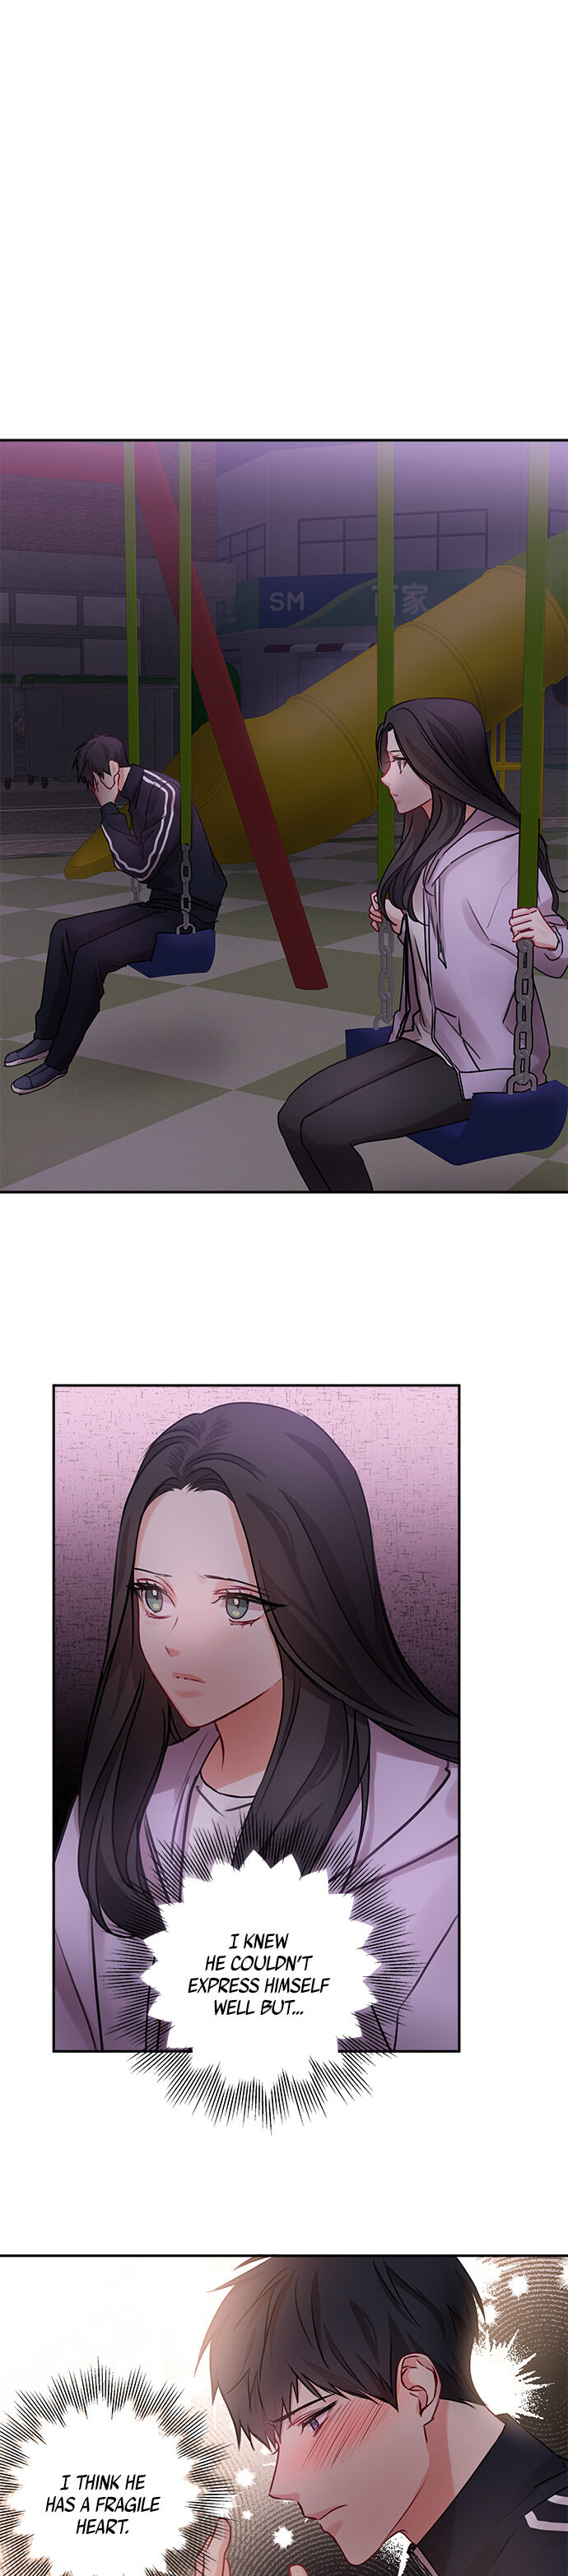 Other's Romance - Page 2